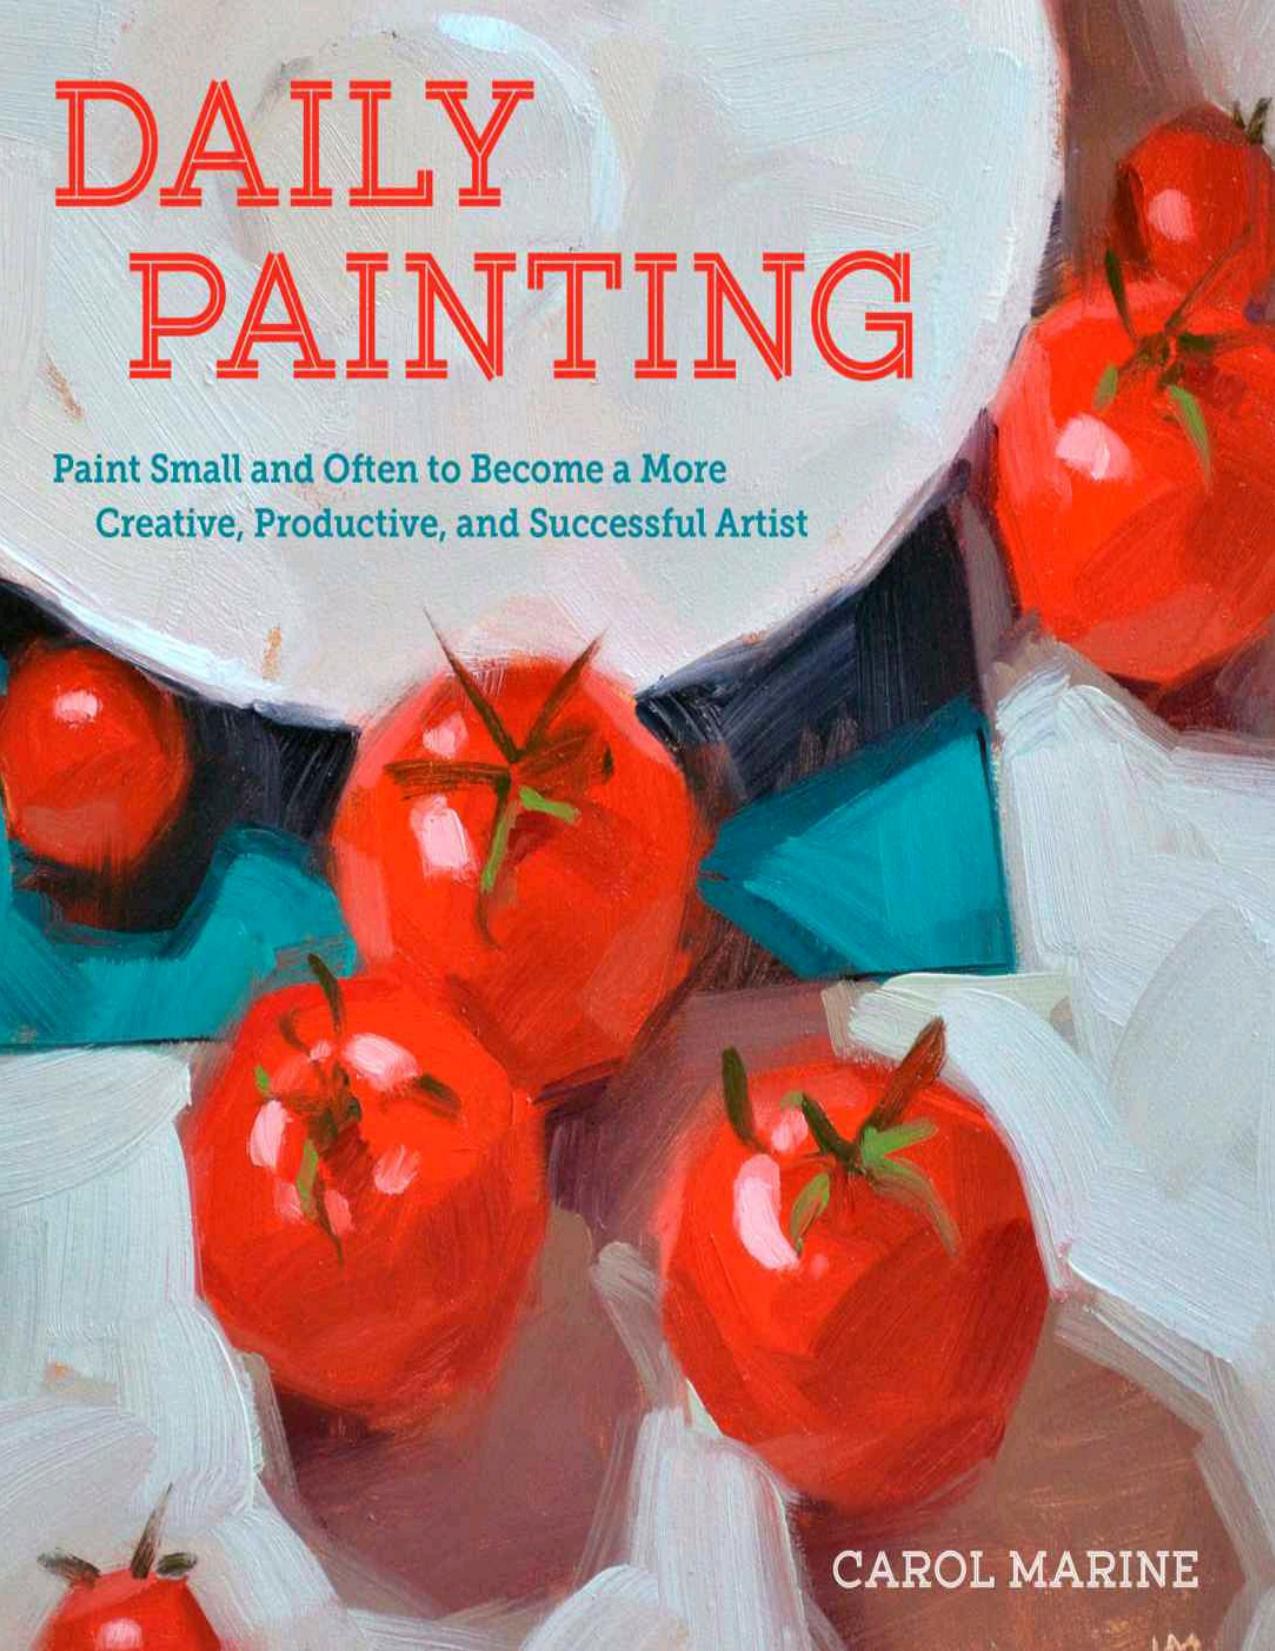 Daily Painting: Paint Small and Often To Become a More Creative, Productive, and Successful Artist by Carol Marine